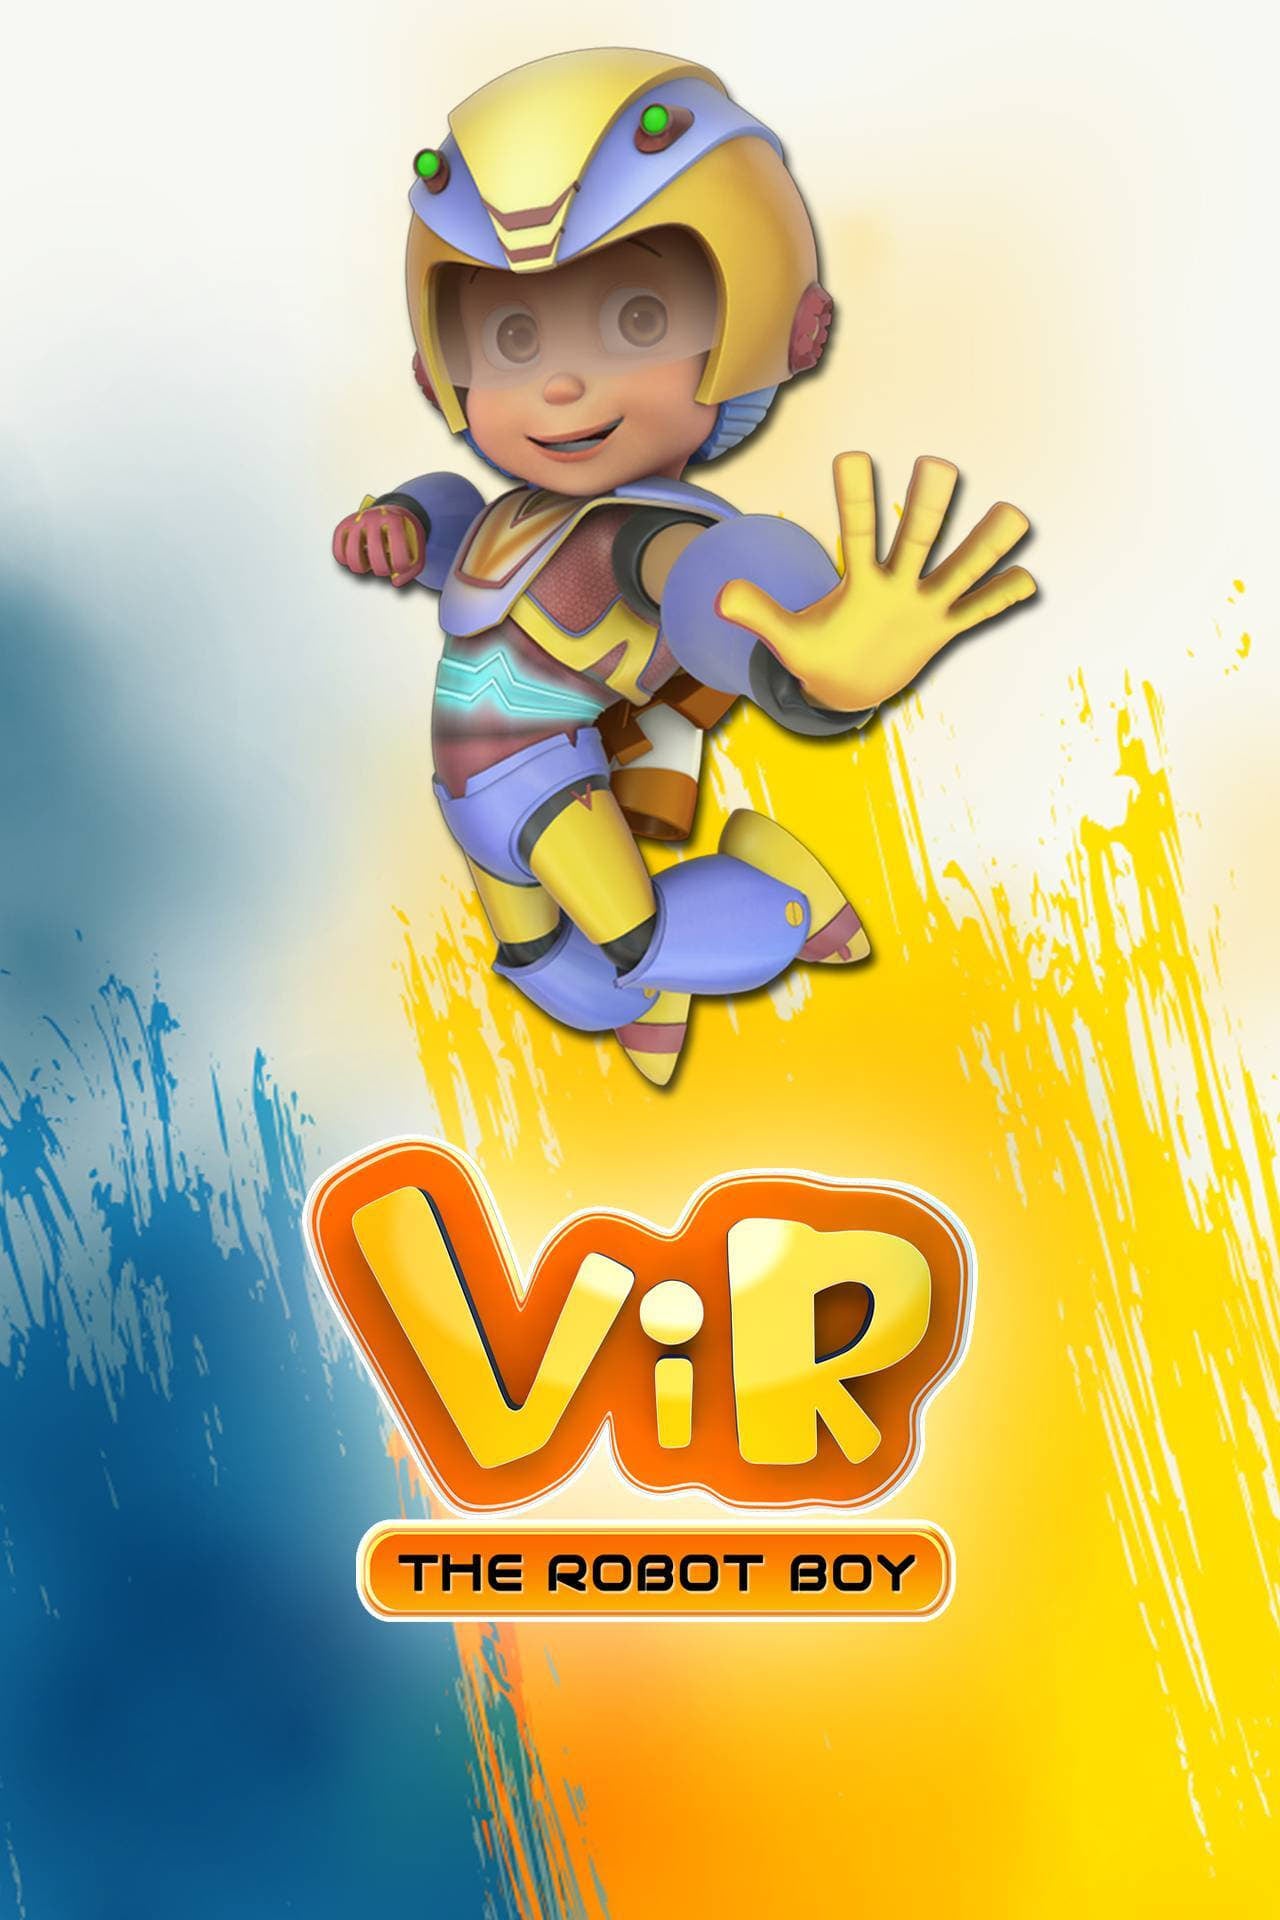 ViR: The Robot Boy (Hungama TV): Spain daily TV audience insights for  smarter content decisions - Parrot Analytics